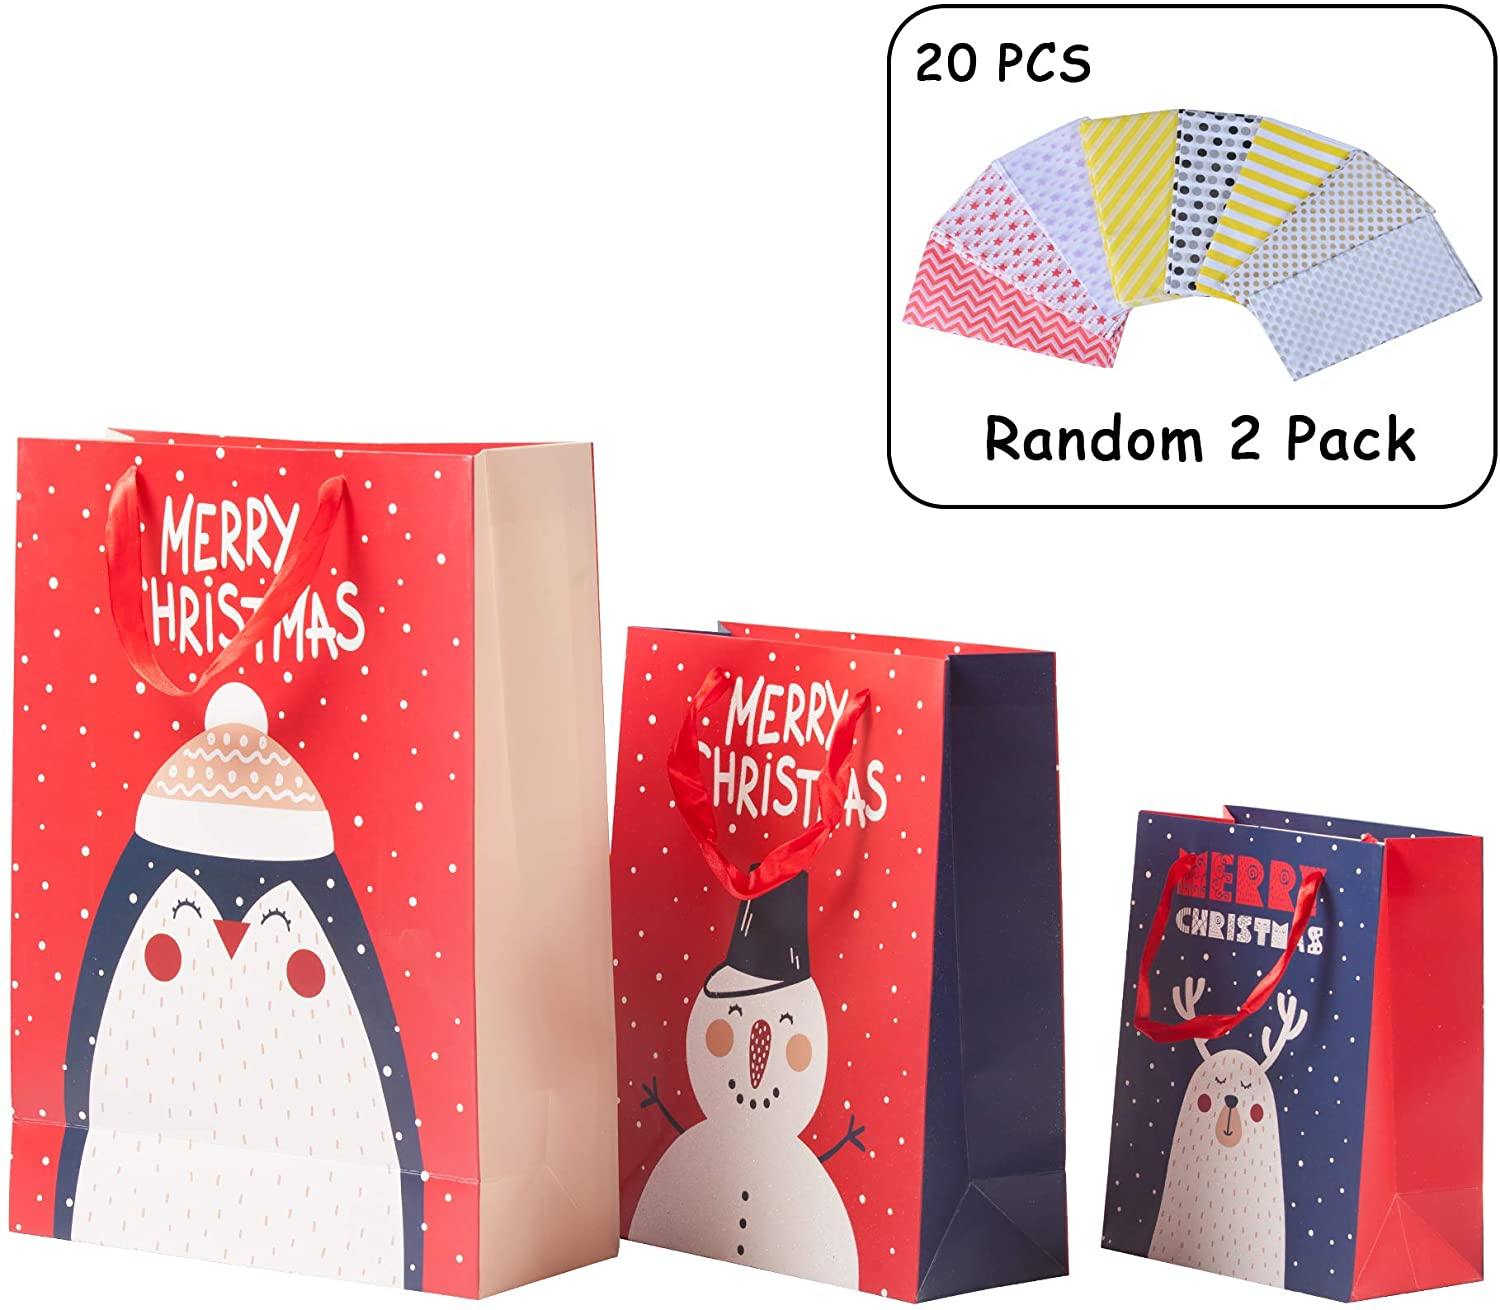 12 Pack Assorted Christmas Gift Bags with Small Medium Large Size, 4 Xmas Pattern Holiday Gift Bags with Tissue Paper, Colorful with Glitter - Bosonshop